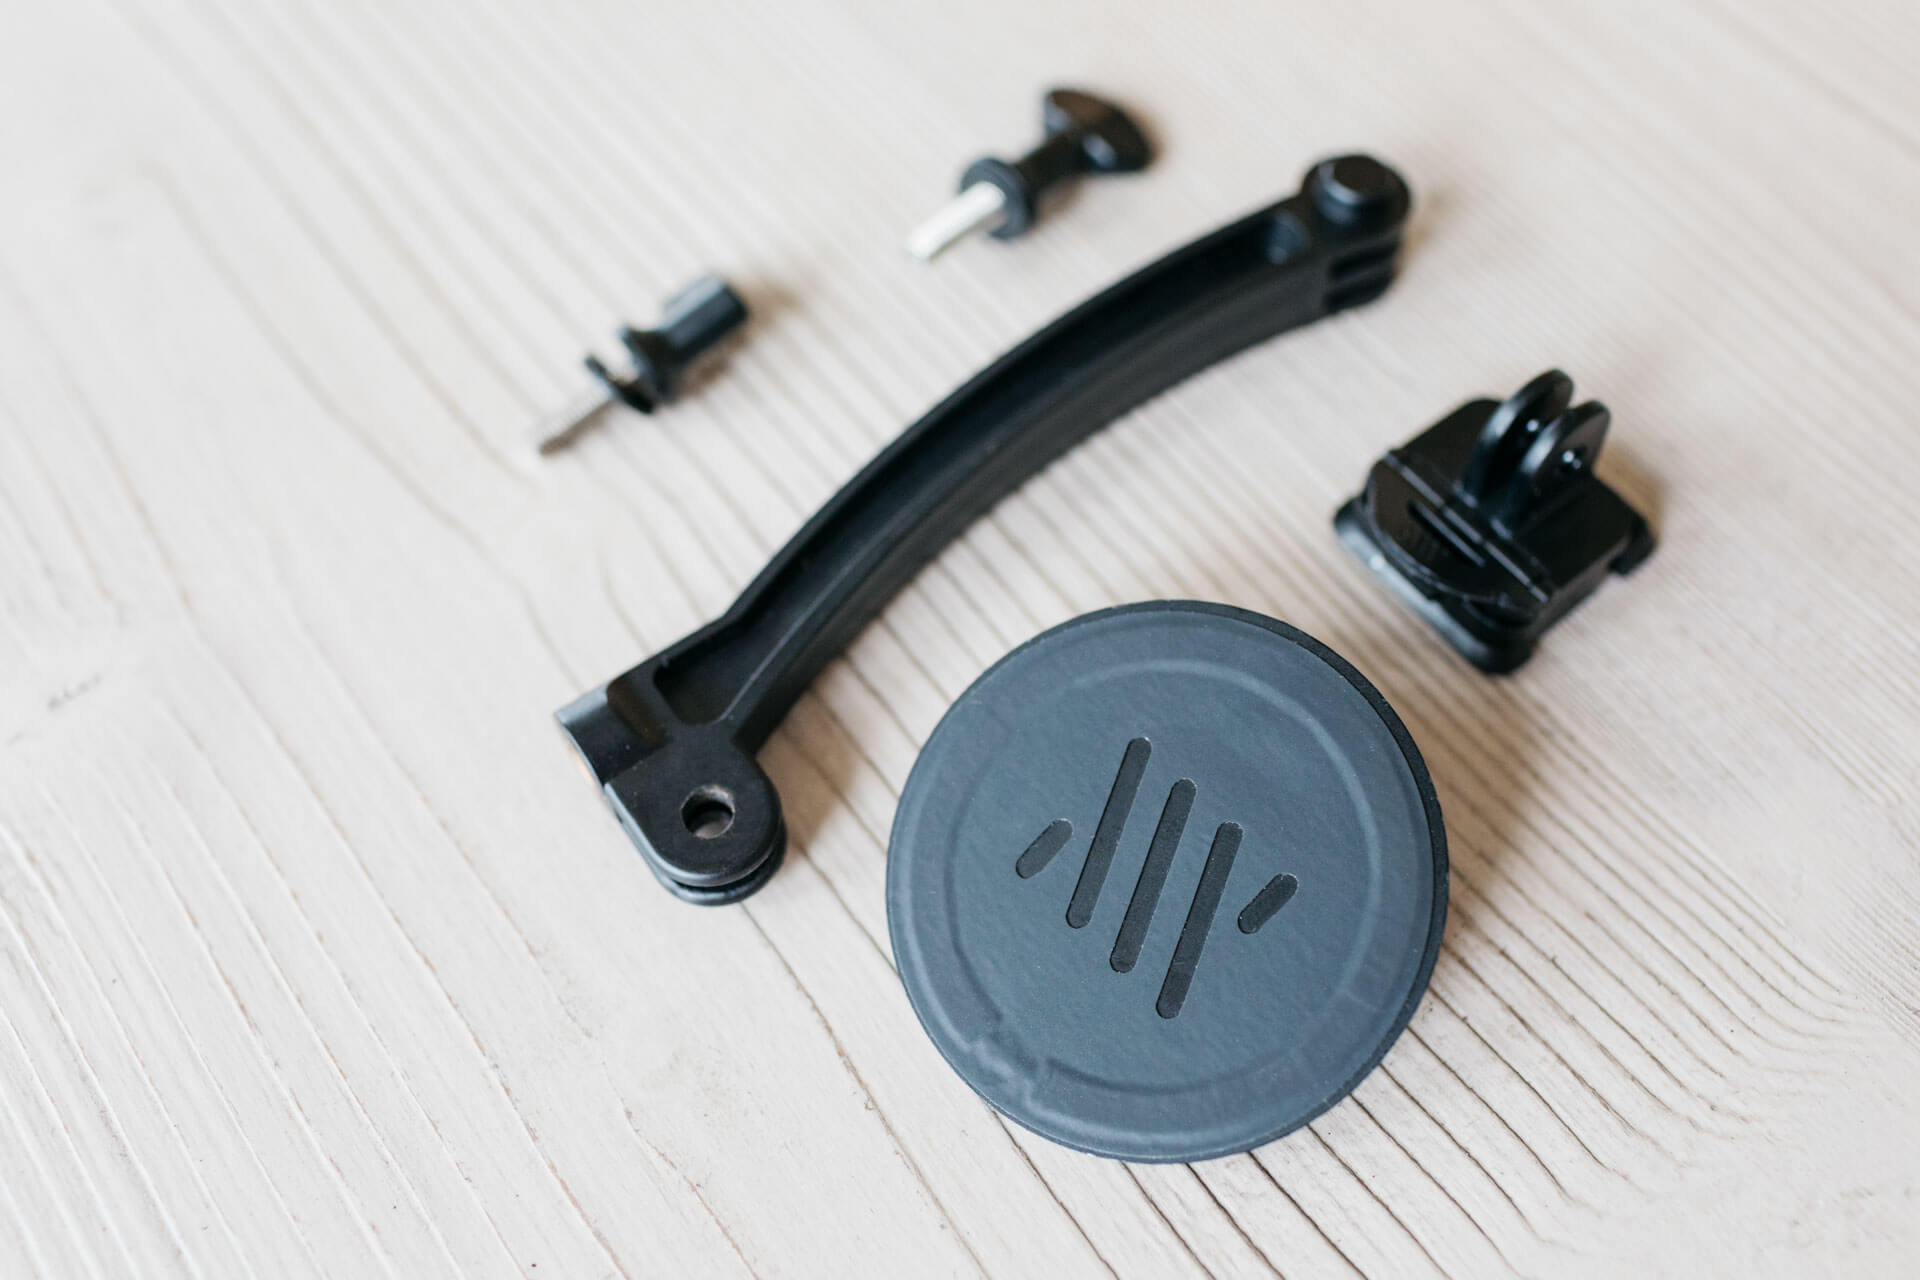 A disassembled Mechanism Phone Mount shows magnetic and GoPro components.